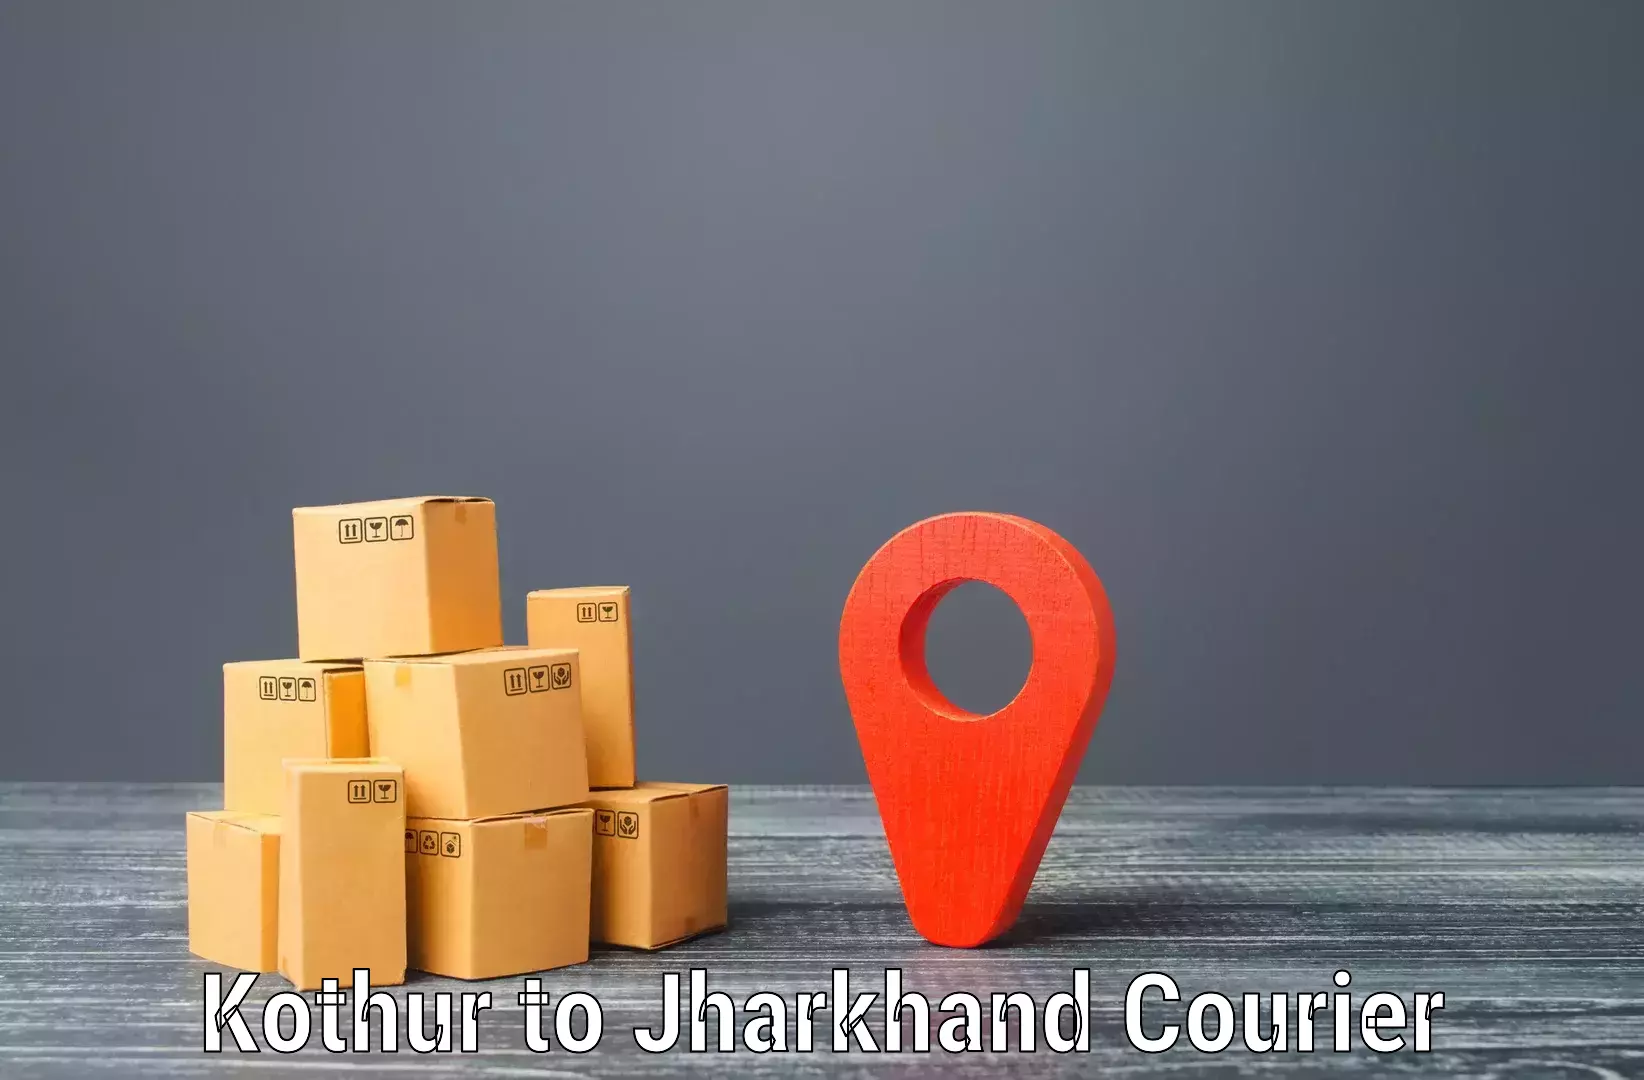 Courier service booking Kothur to Adityapur